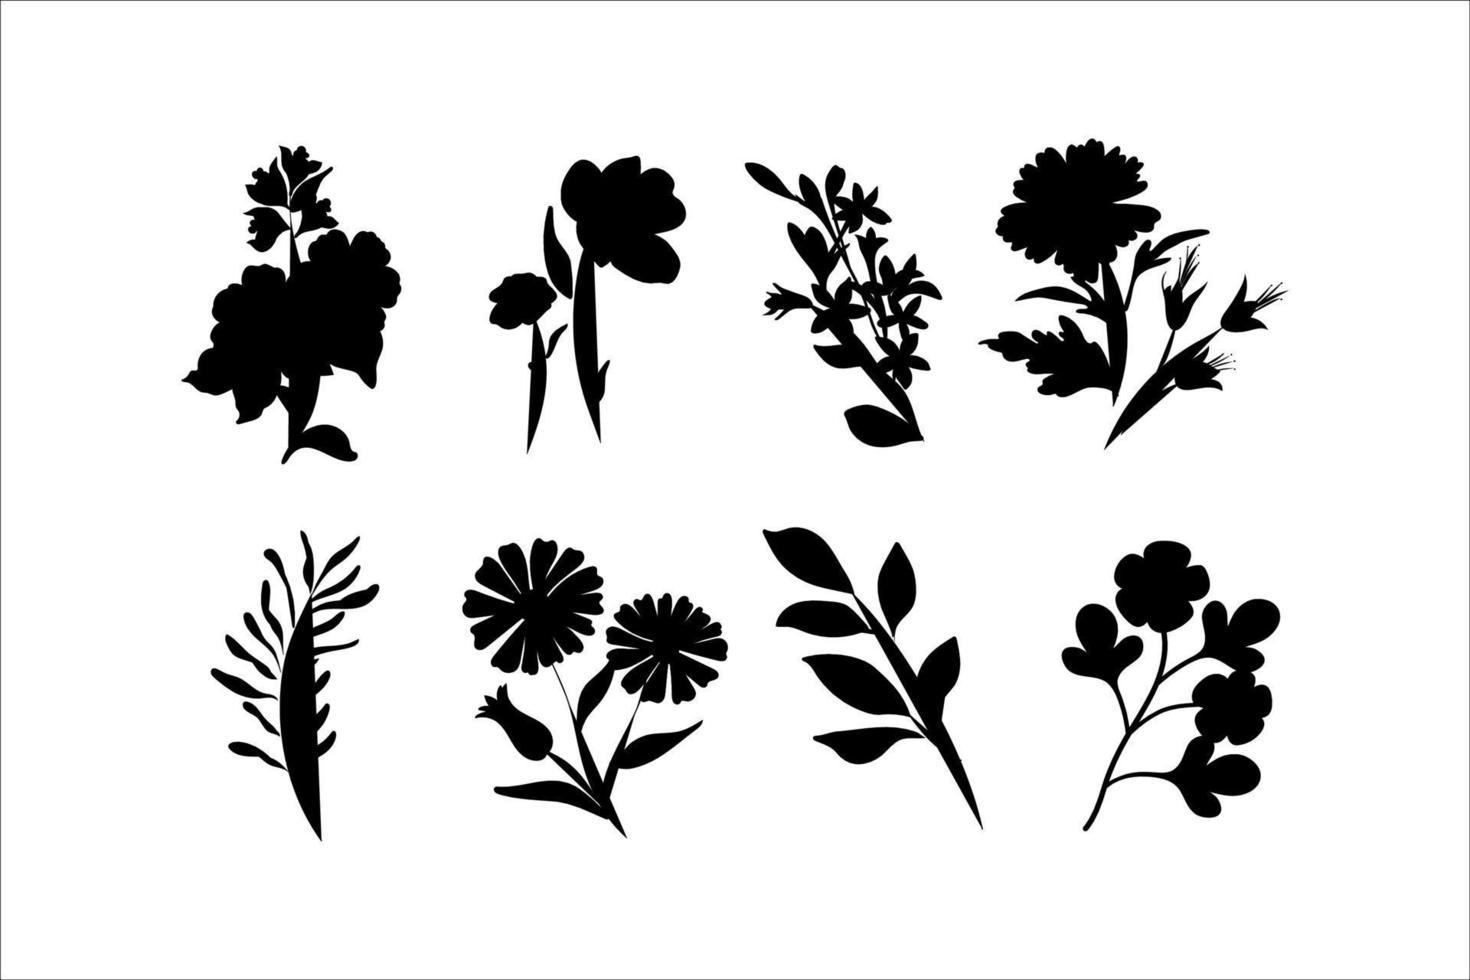 leaves black silhouettes set  vector